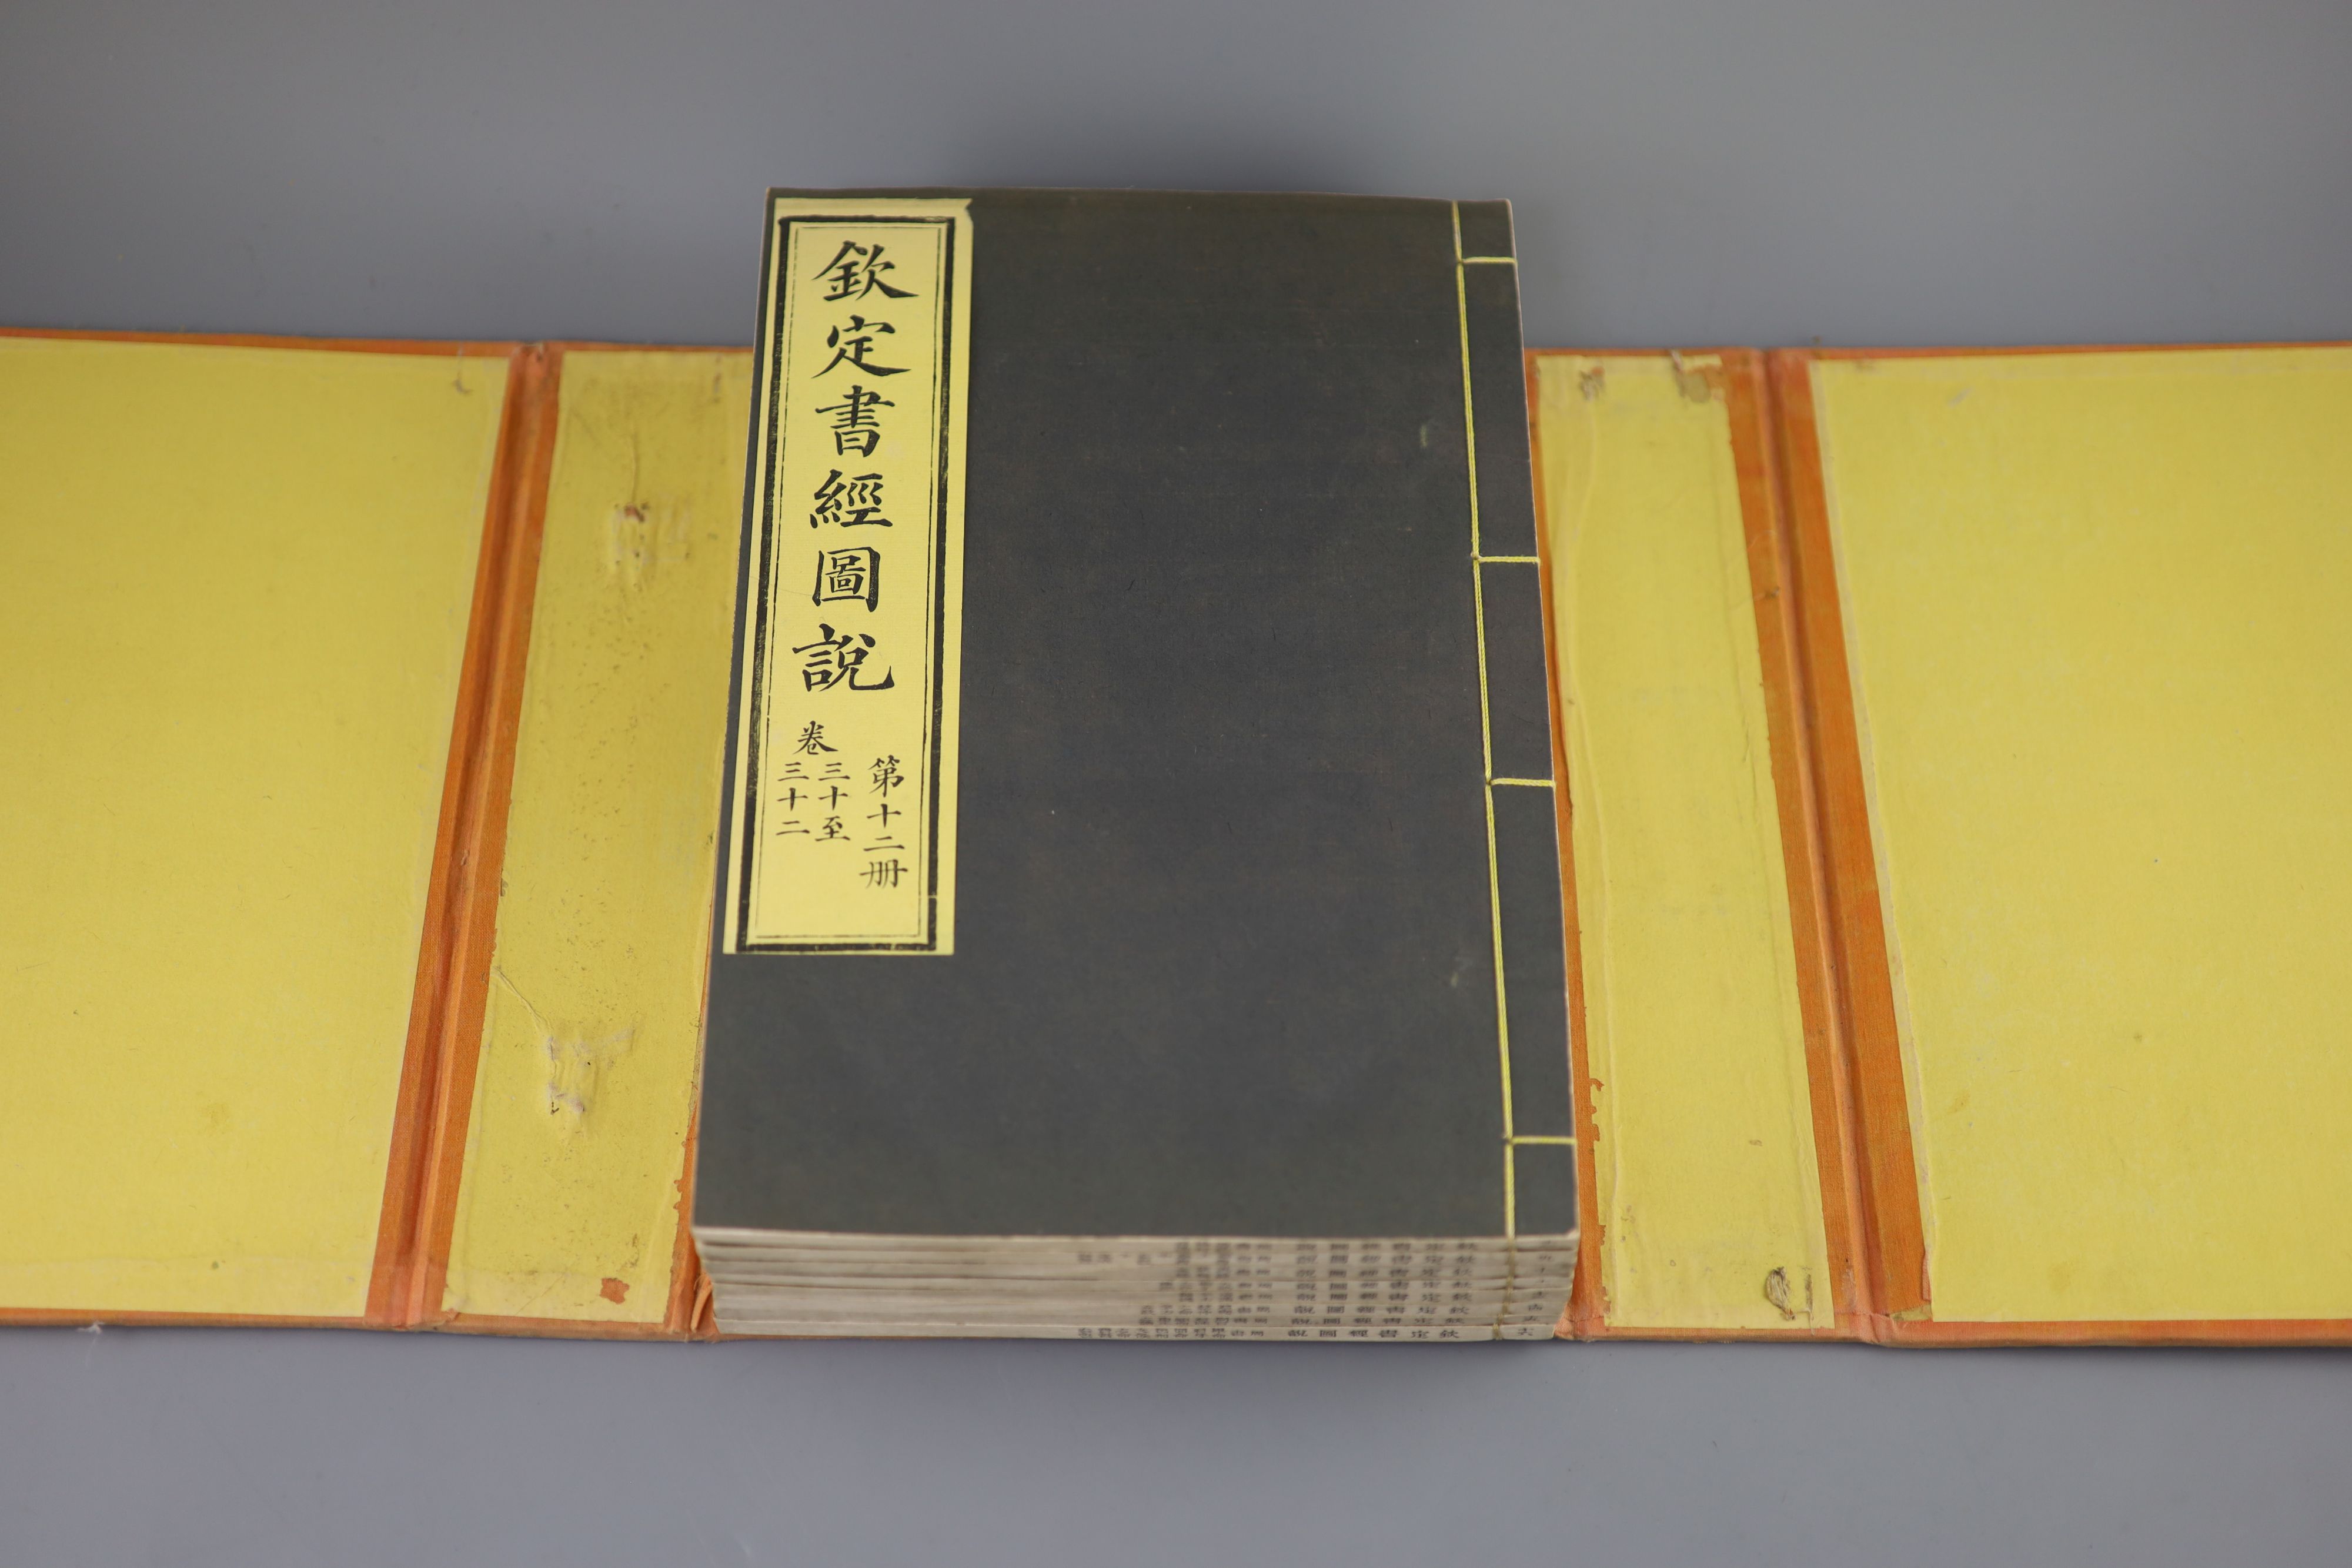 Rare Chinese book, Imperial Edition of the Illustrated Book of Documents Qinding shujing tushuo, Provenance - A. T. Arber-Cooke